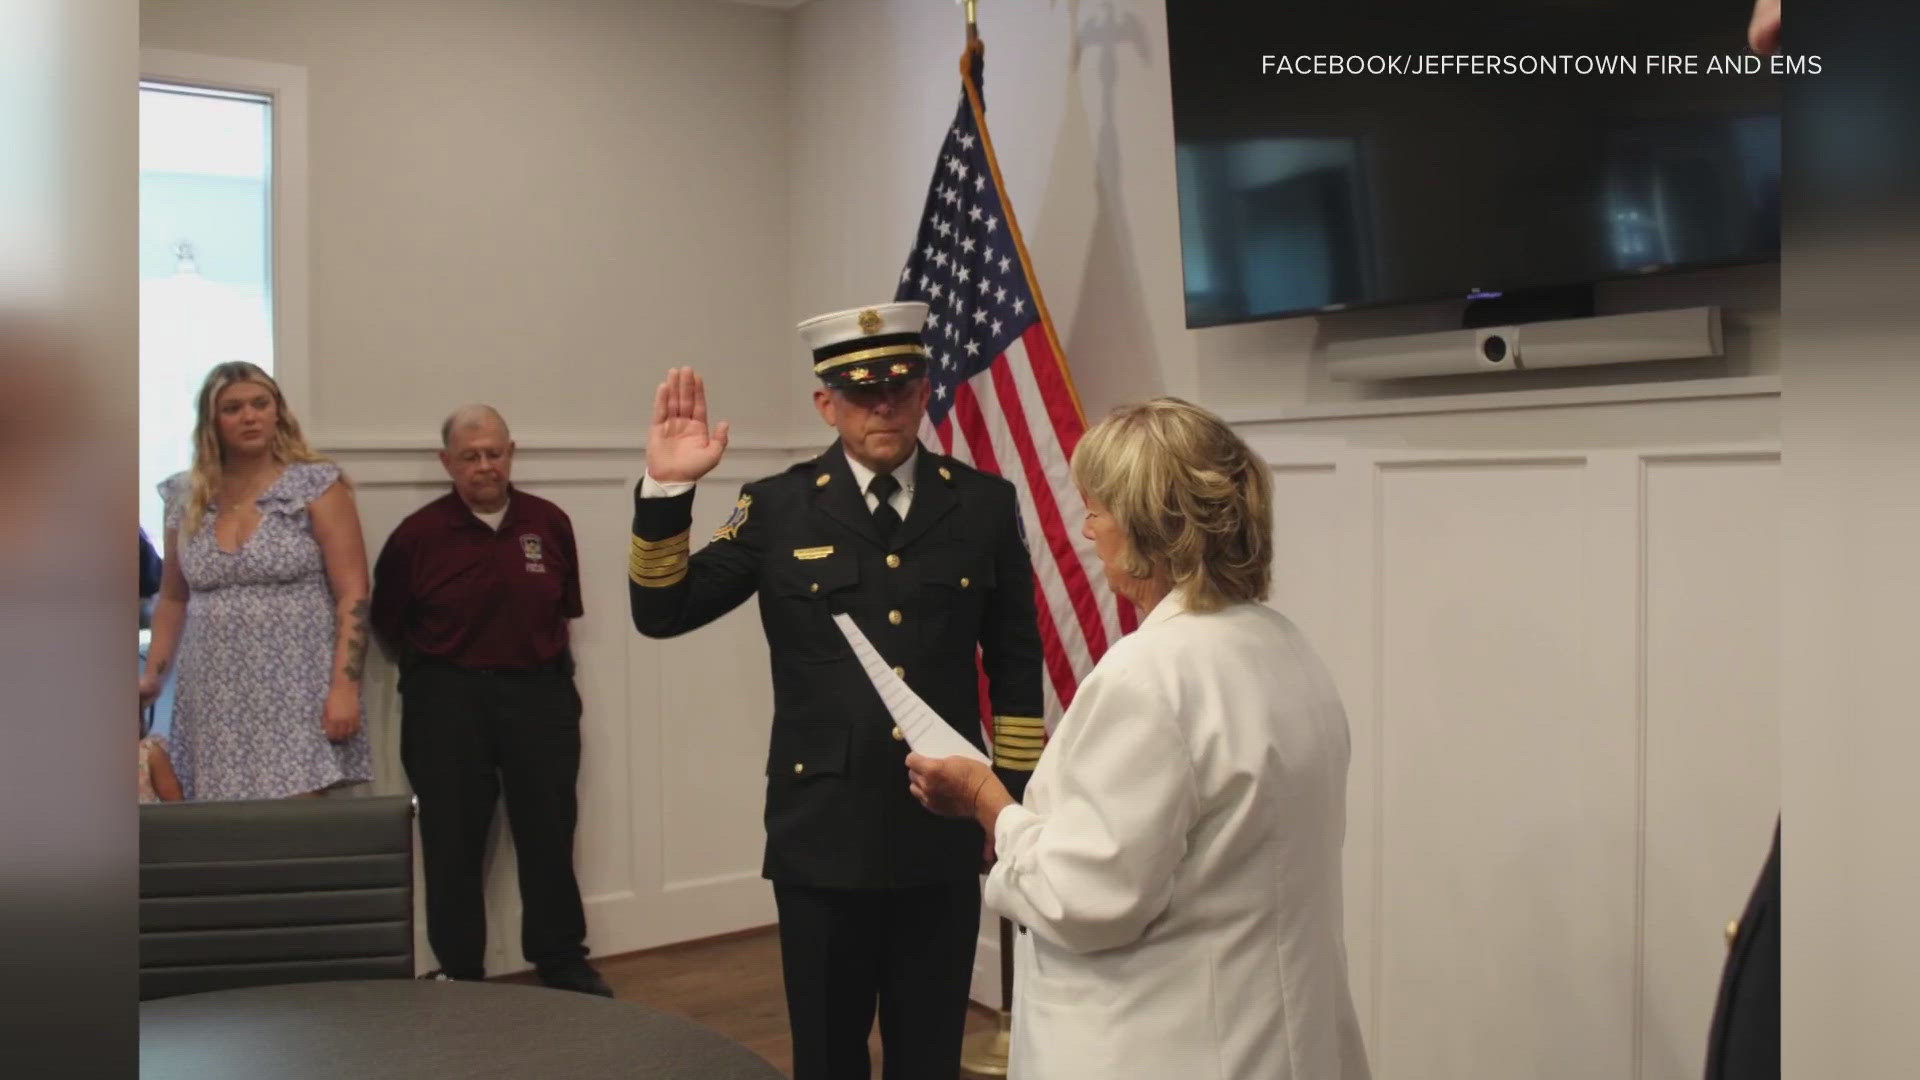 Mark Ohlmann was sworn-in Monday as the department's new leader.